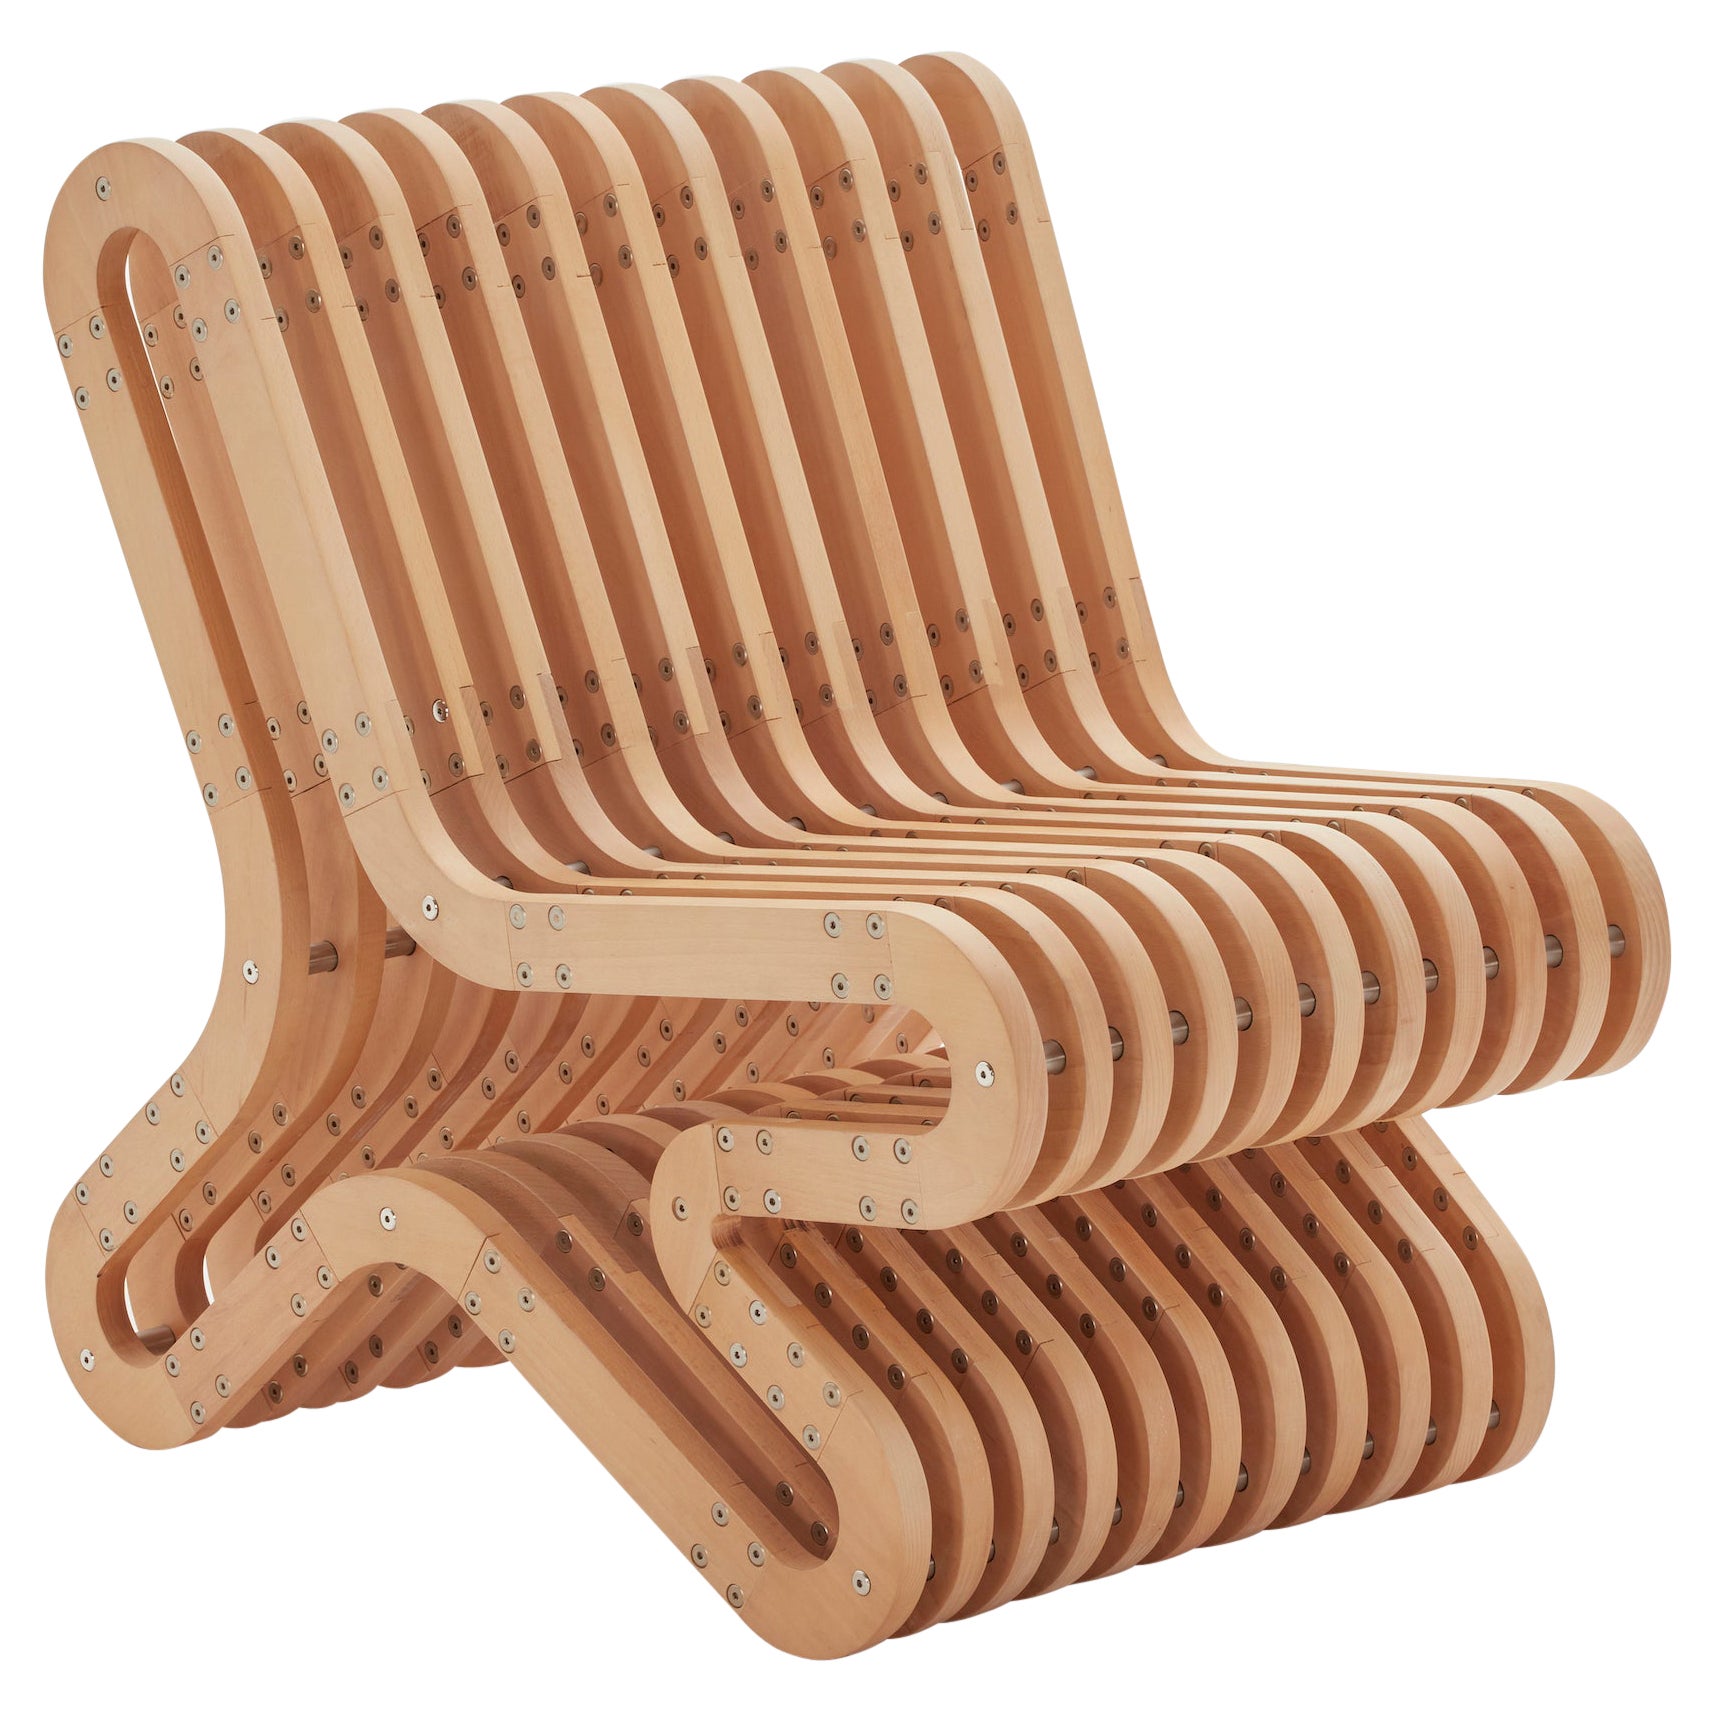 The Slank Occasional Chair